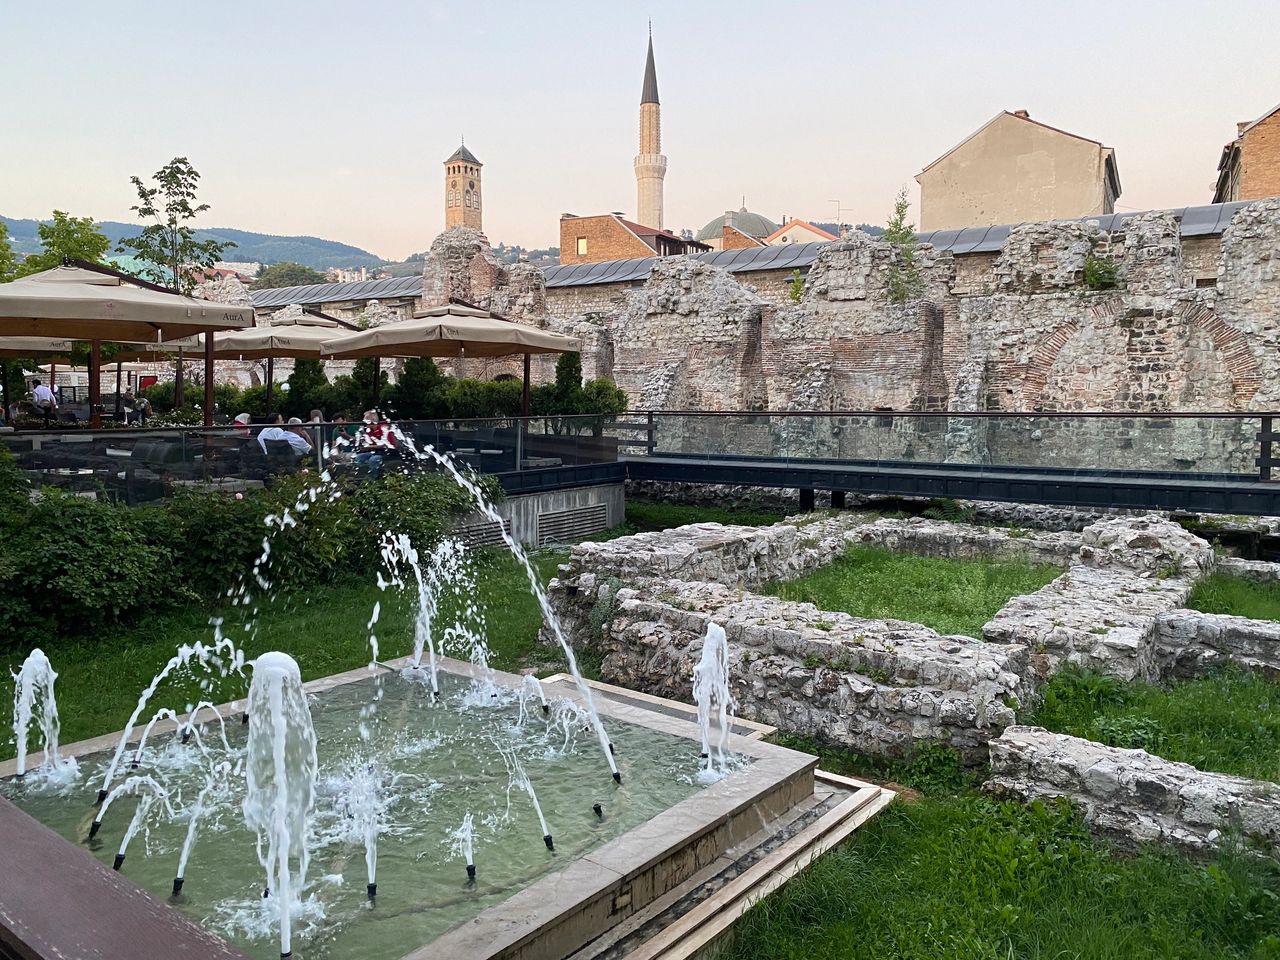 Fountains and ruins next to the hotel in Sarajevo, Bosnia